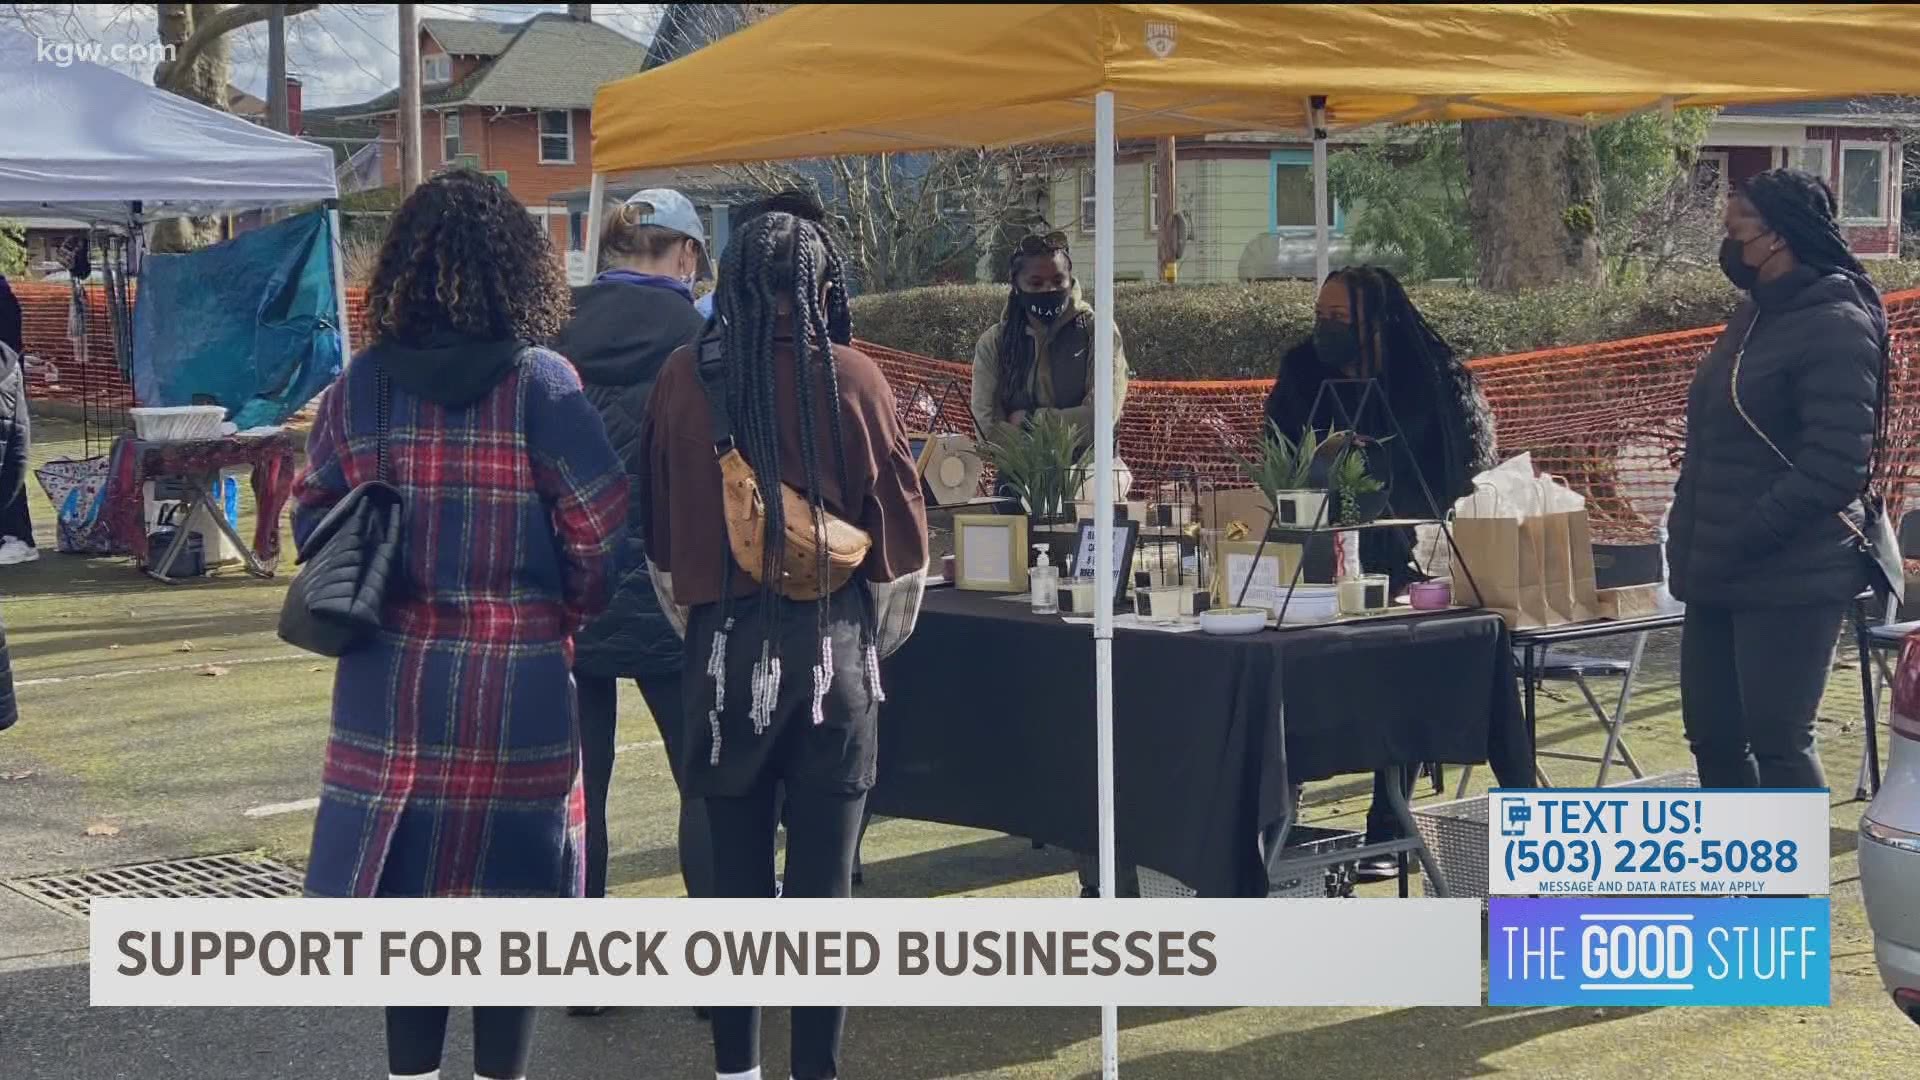 SEI in North Portland is holding an outdoor market this weekend to support Black-owned small businesses that may not have brick and mortar.